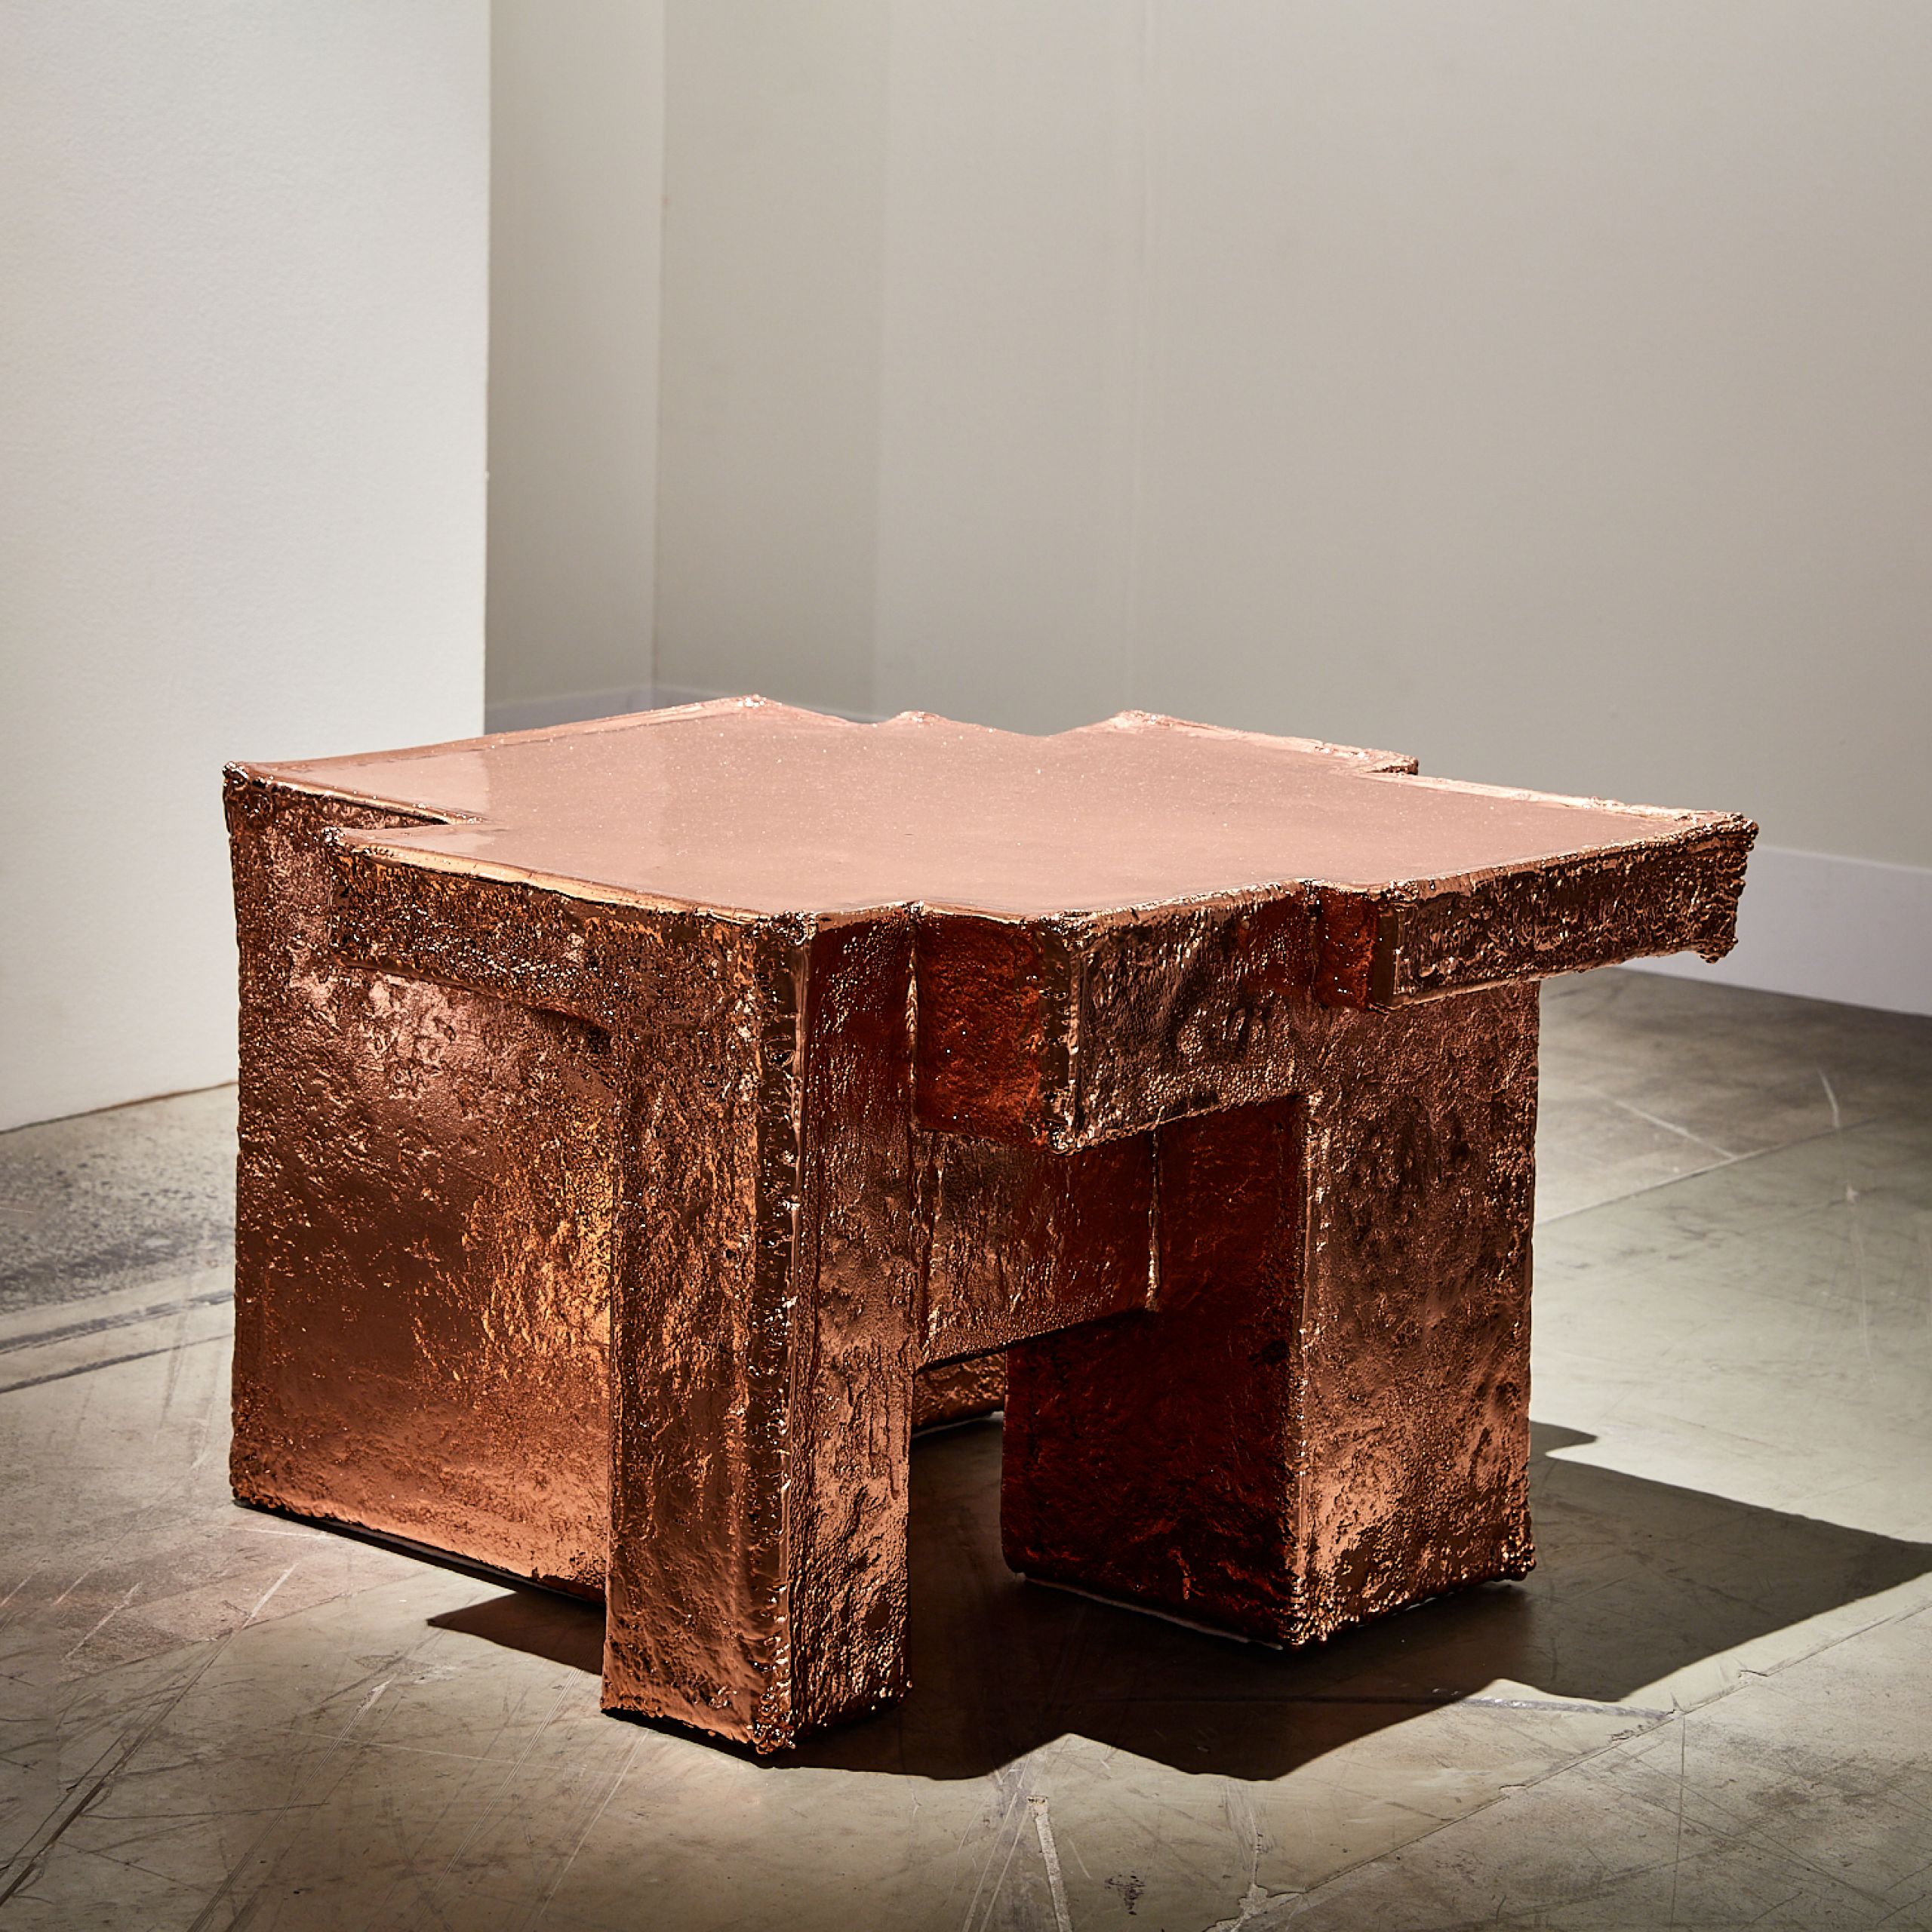 © Studio Nucleo 'Metal Fossil Copper Coffee Table' courtesy ammann//gallery